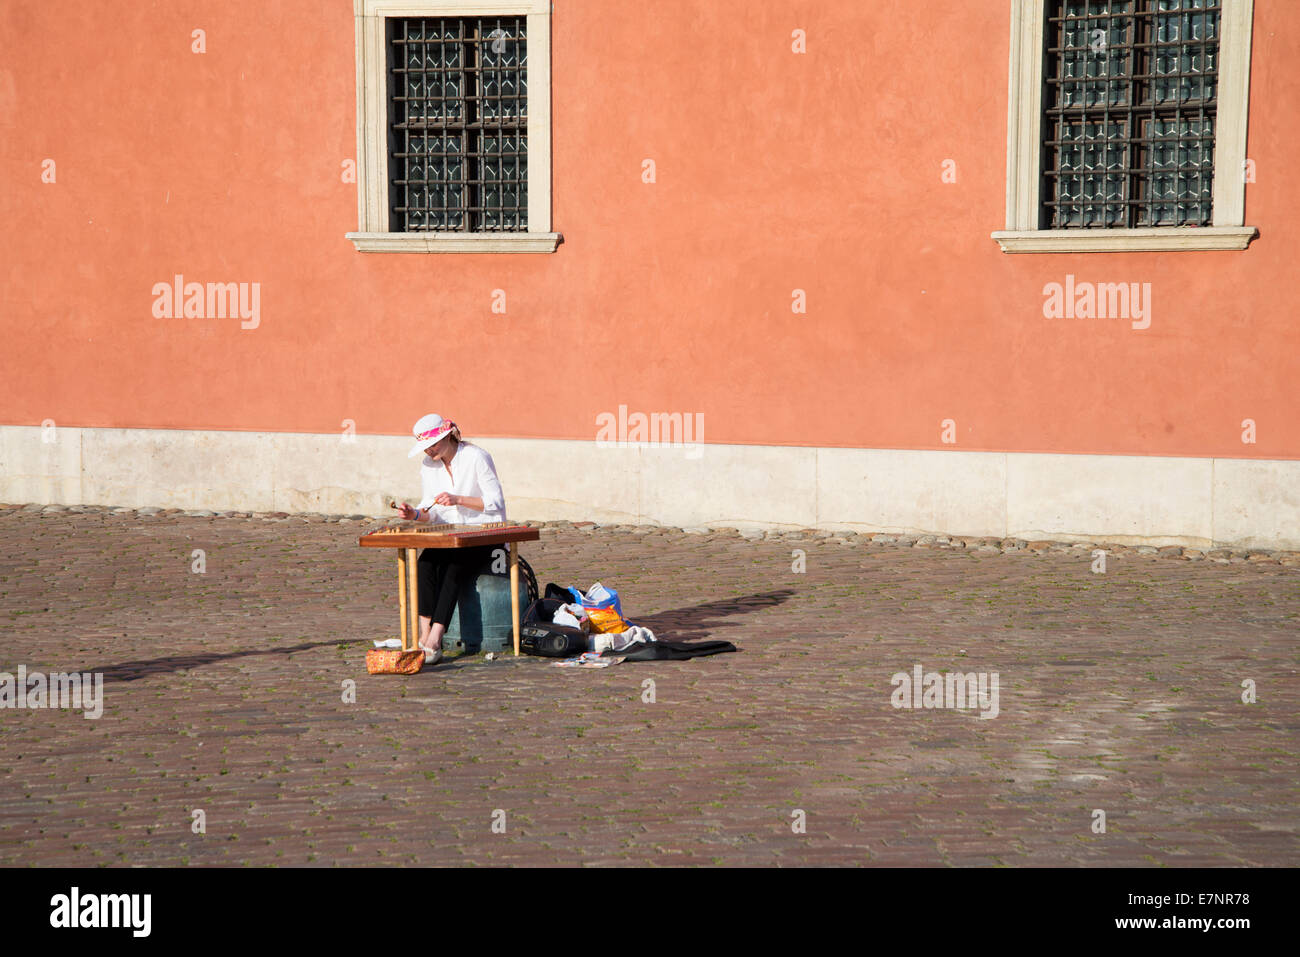 Warsaw, Poland, June 2014: Female street musician playing a hammered dulcimer in the old town Warsaw. Stock Photo